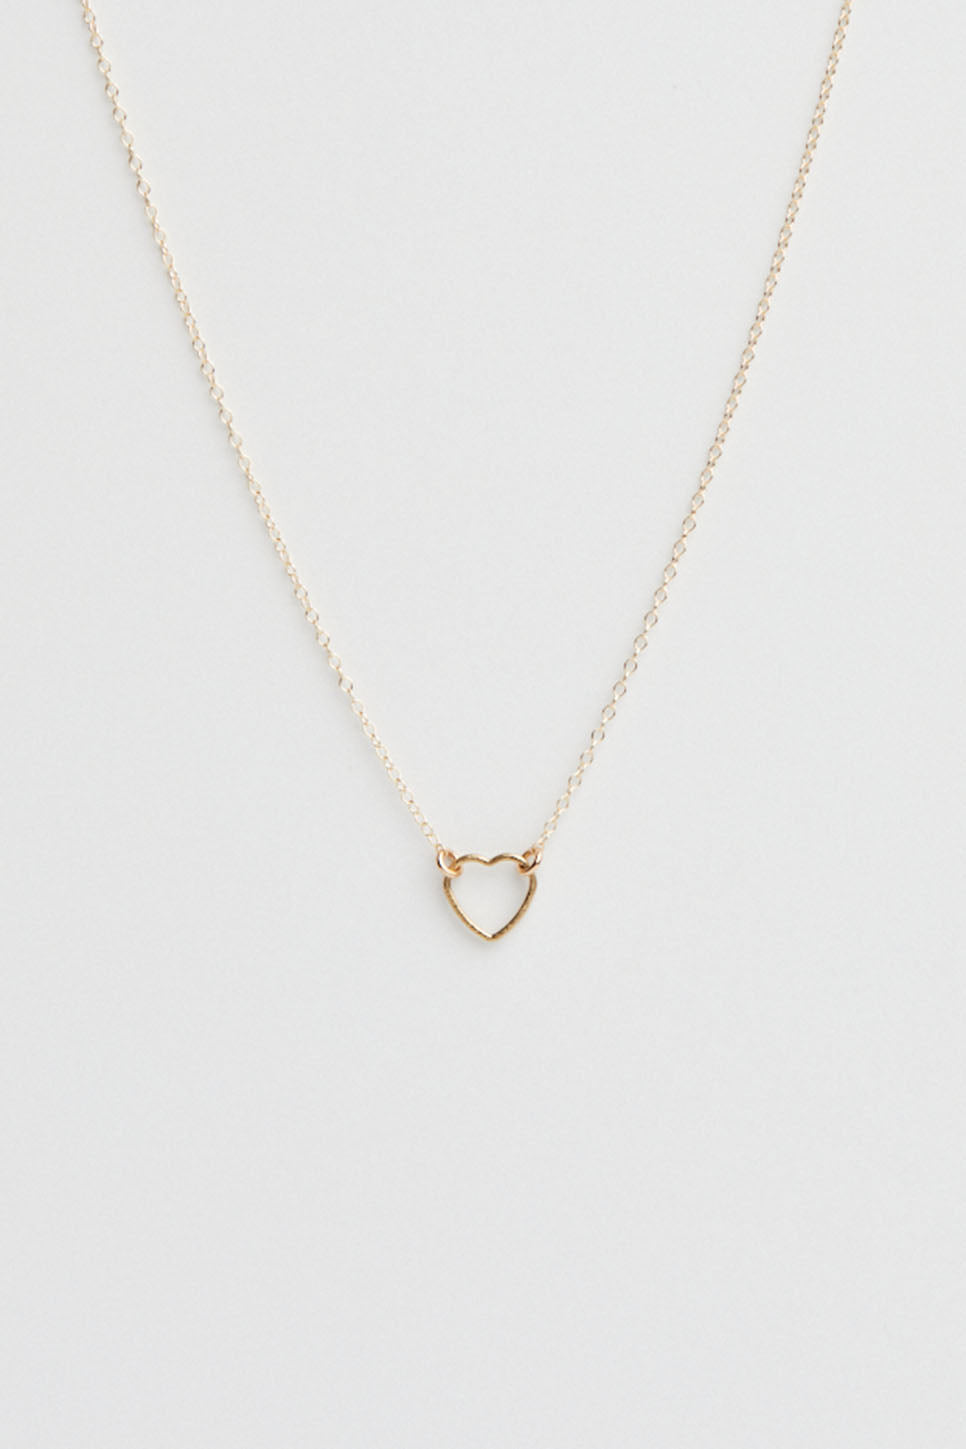 Able - Floating Shape Necklace - Gold Heart